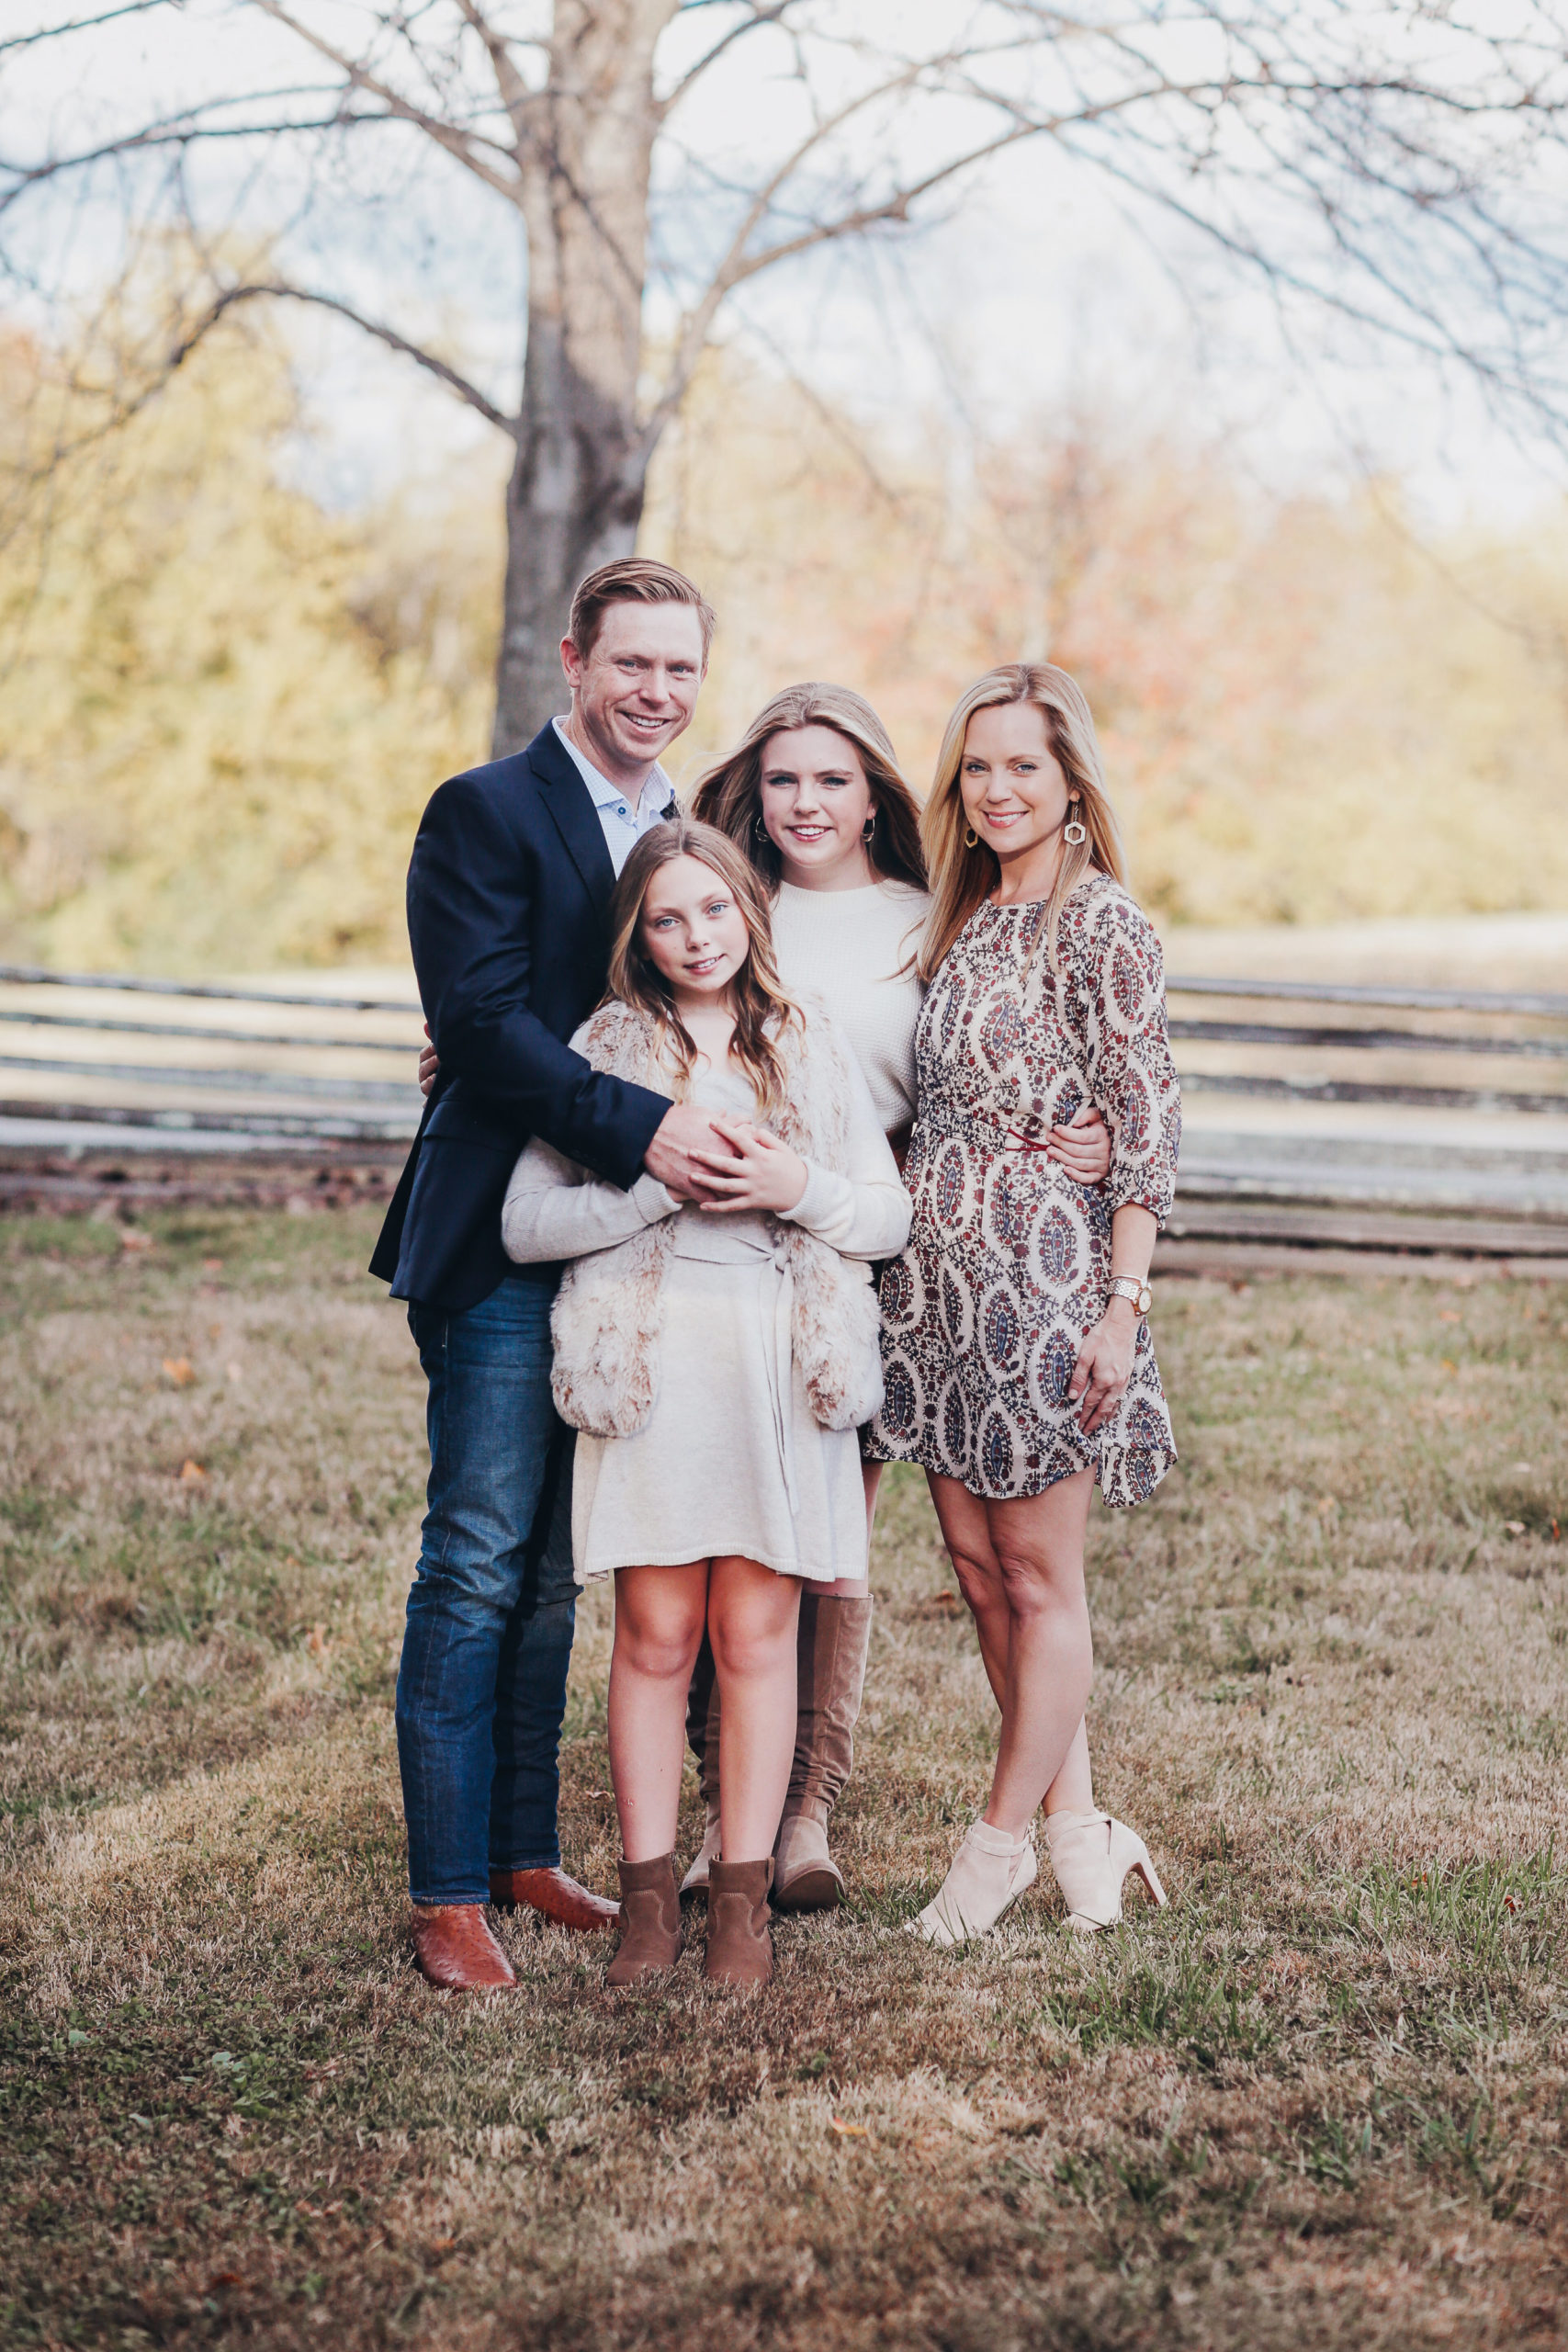 Styling Fall Family Photos in Nashville What to Wear